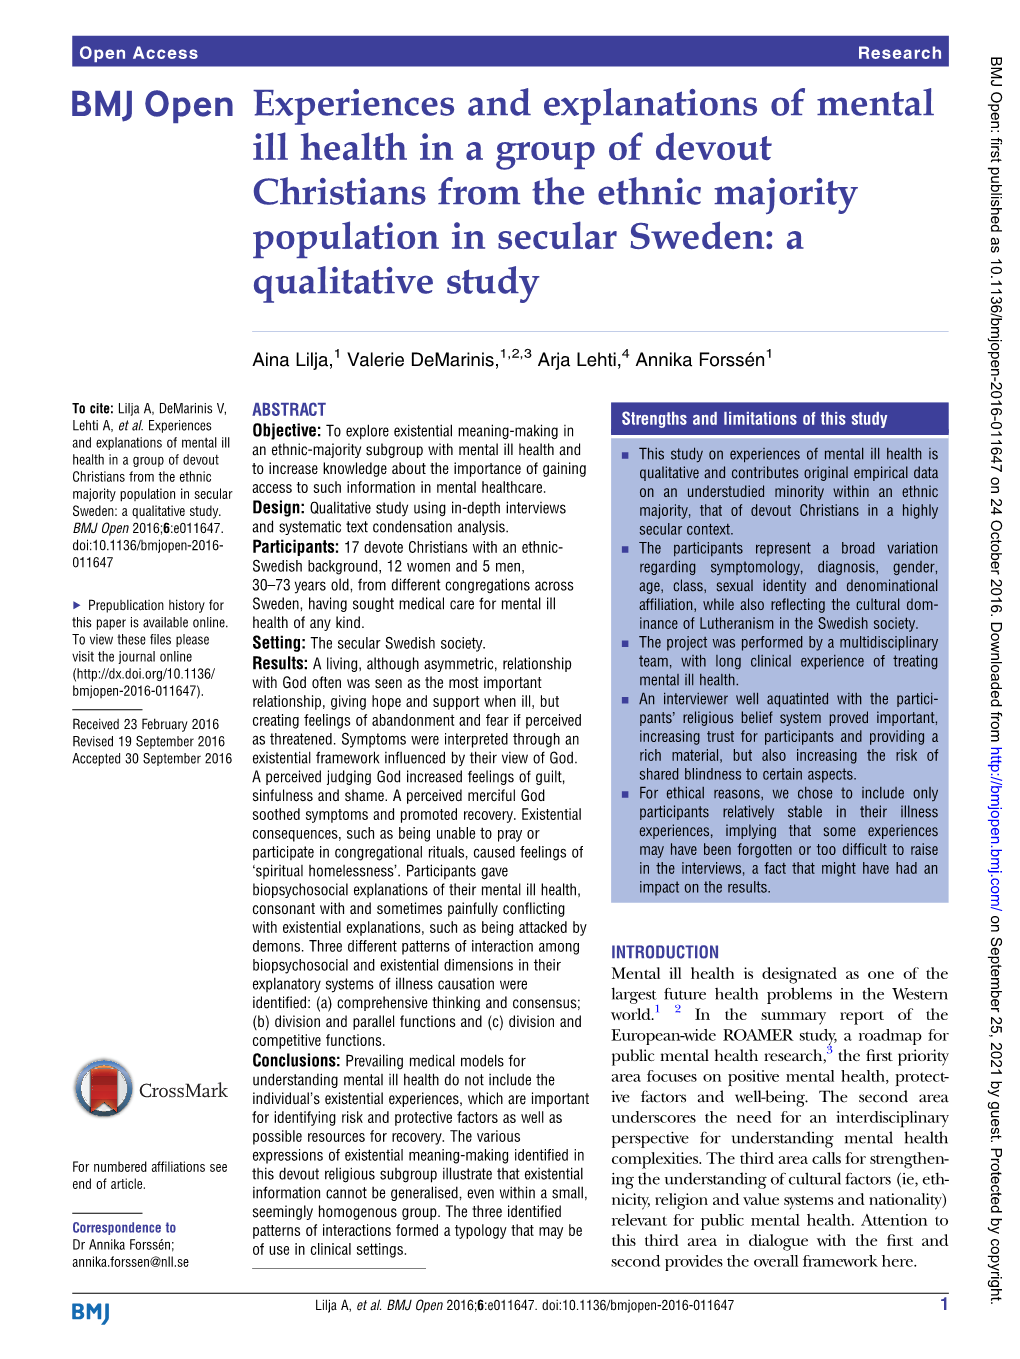 Experiences and Explanations of Mental Ill Health in a Group of Devout Christians from the Ethnic Majority Population in Secular Sweden: a Qualitative Study